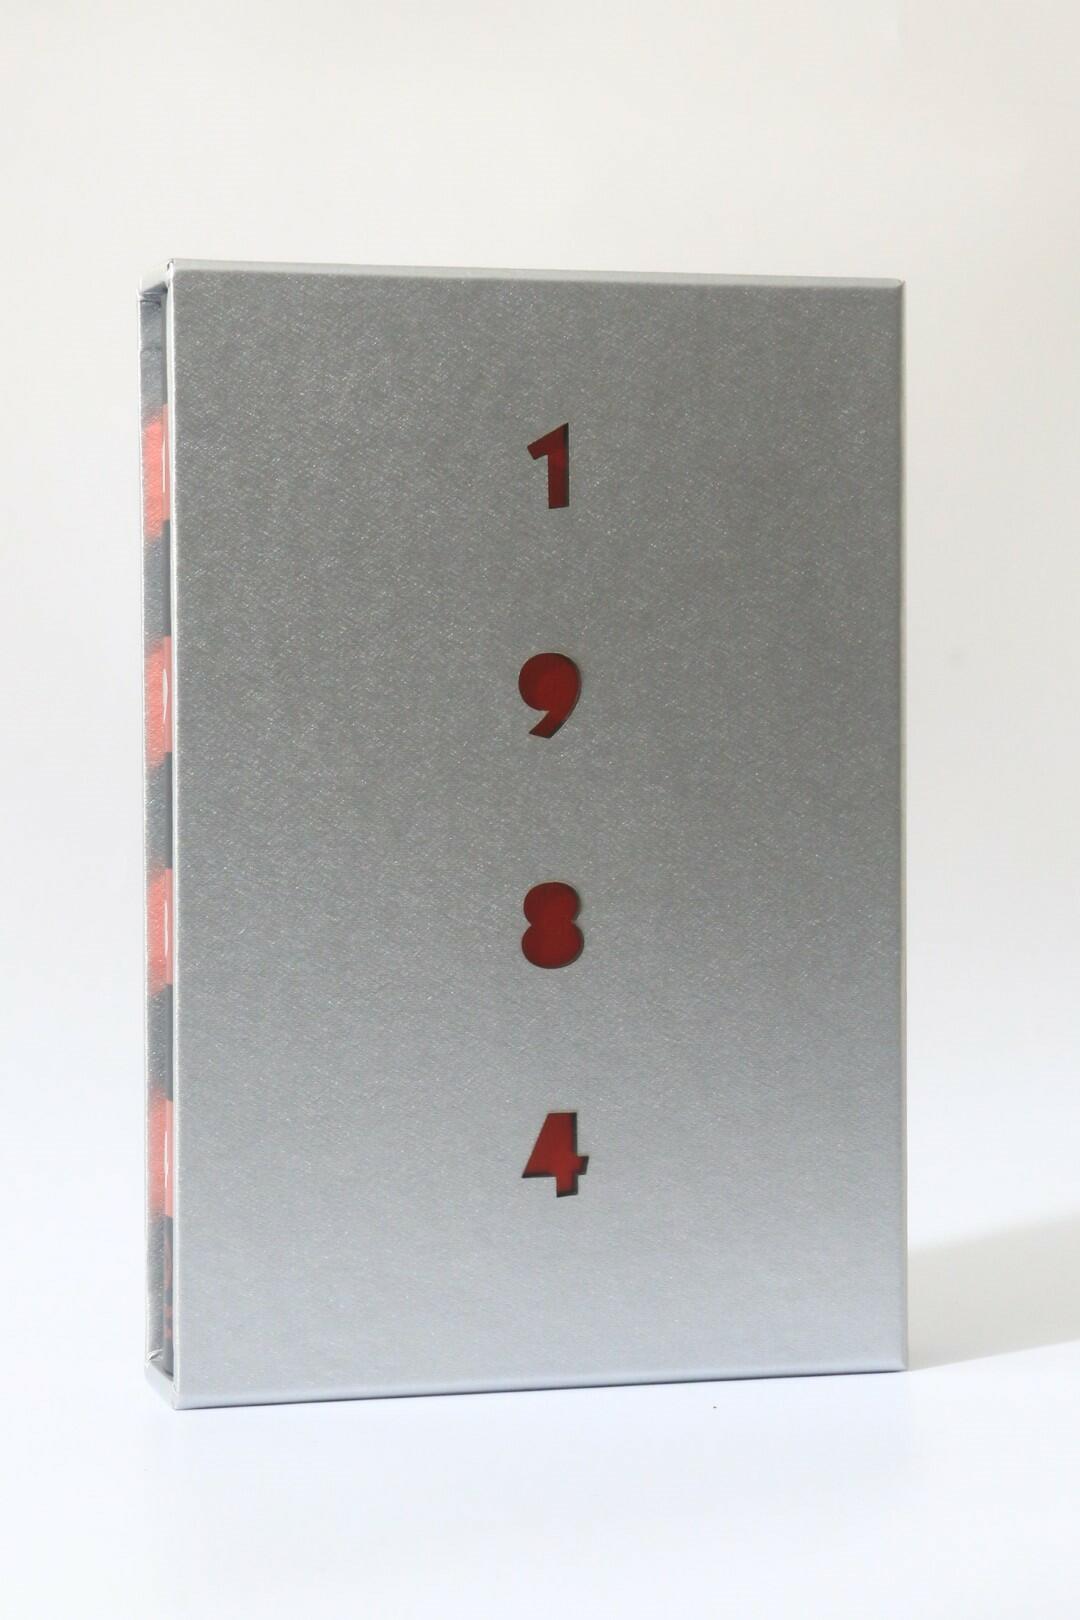 George Orwell - 1984 - Suntup Press, 2021, Limited Edition.